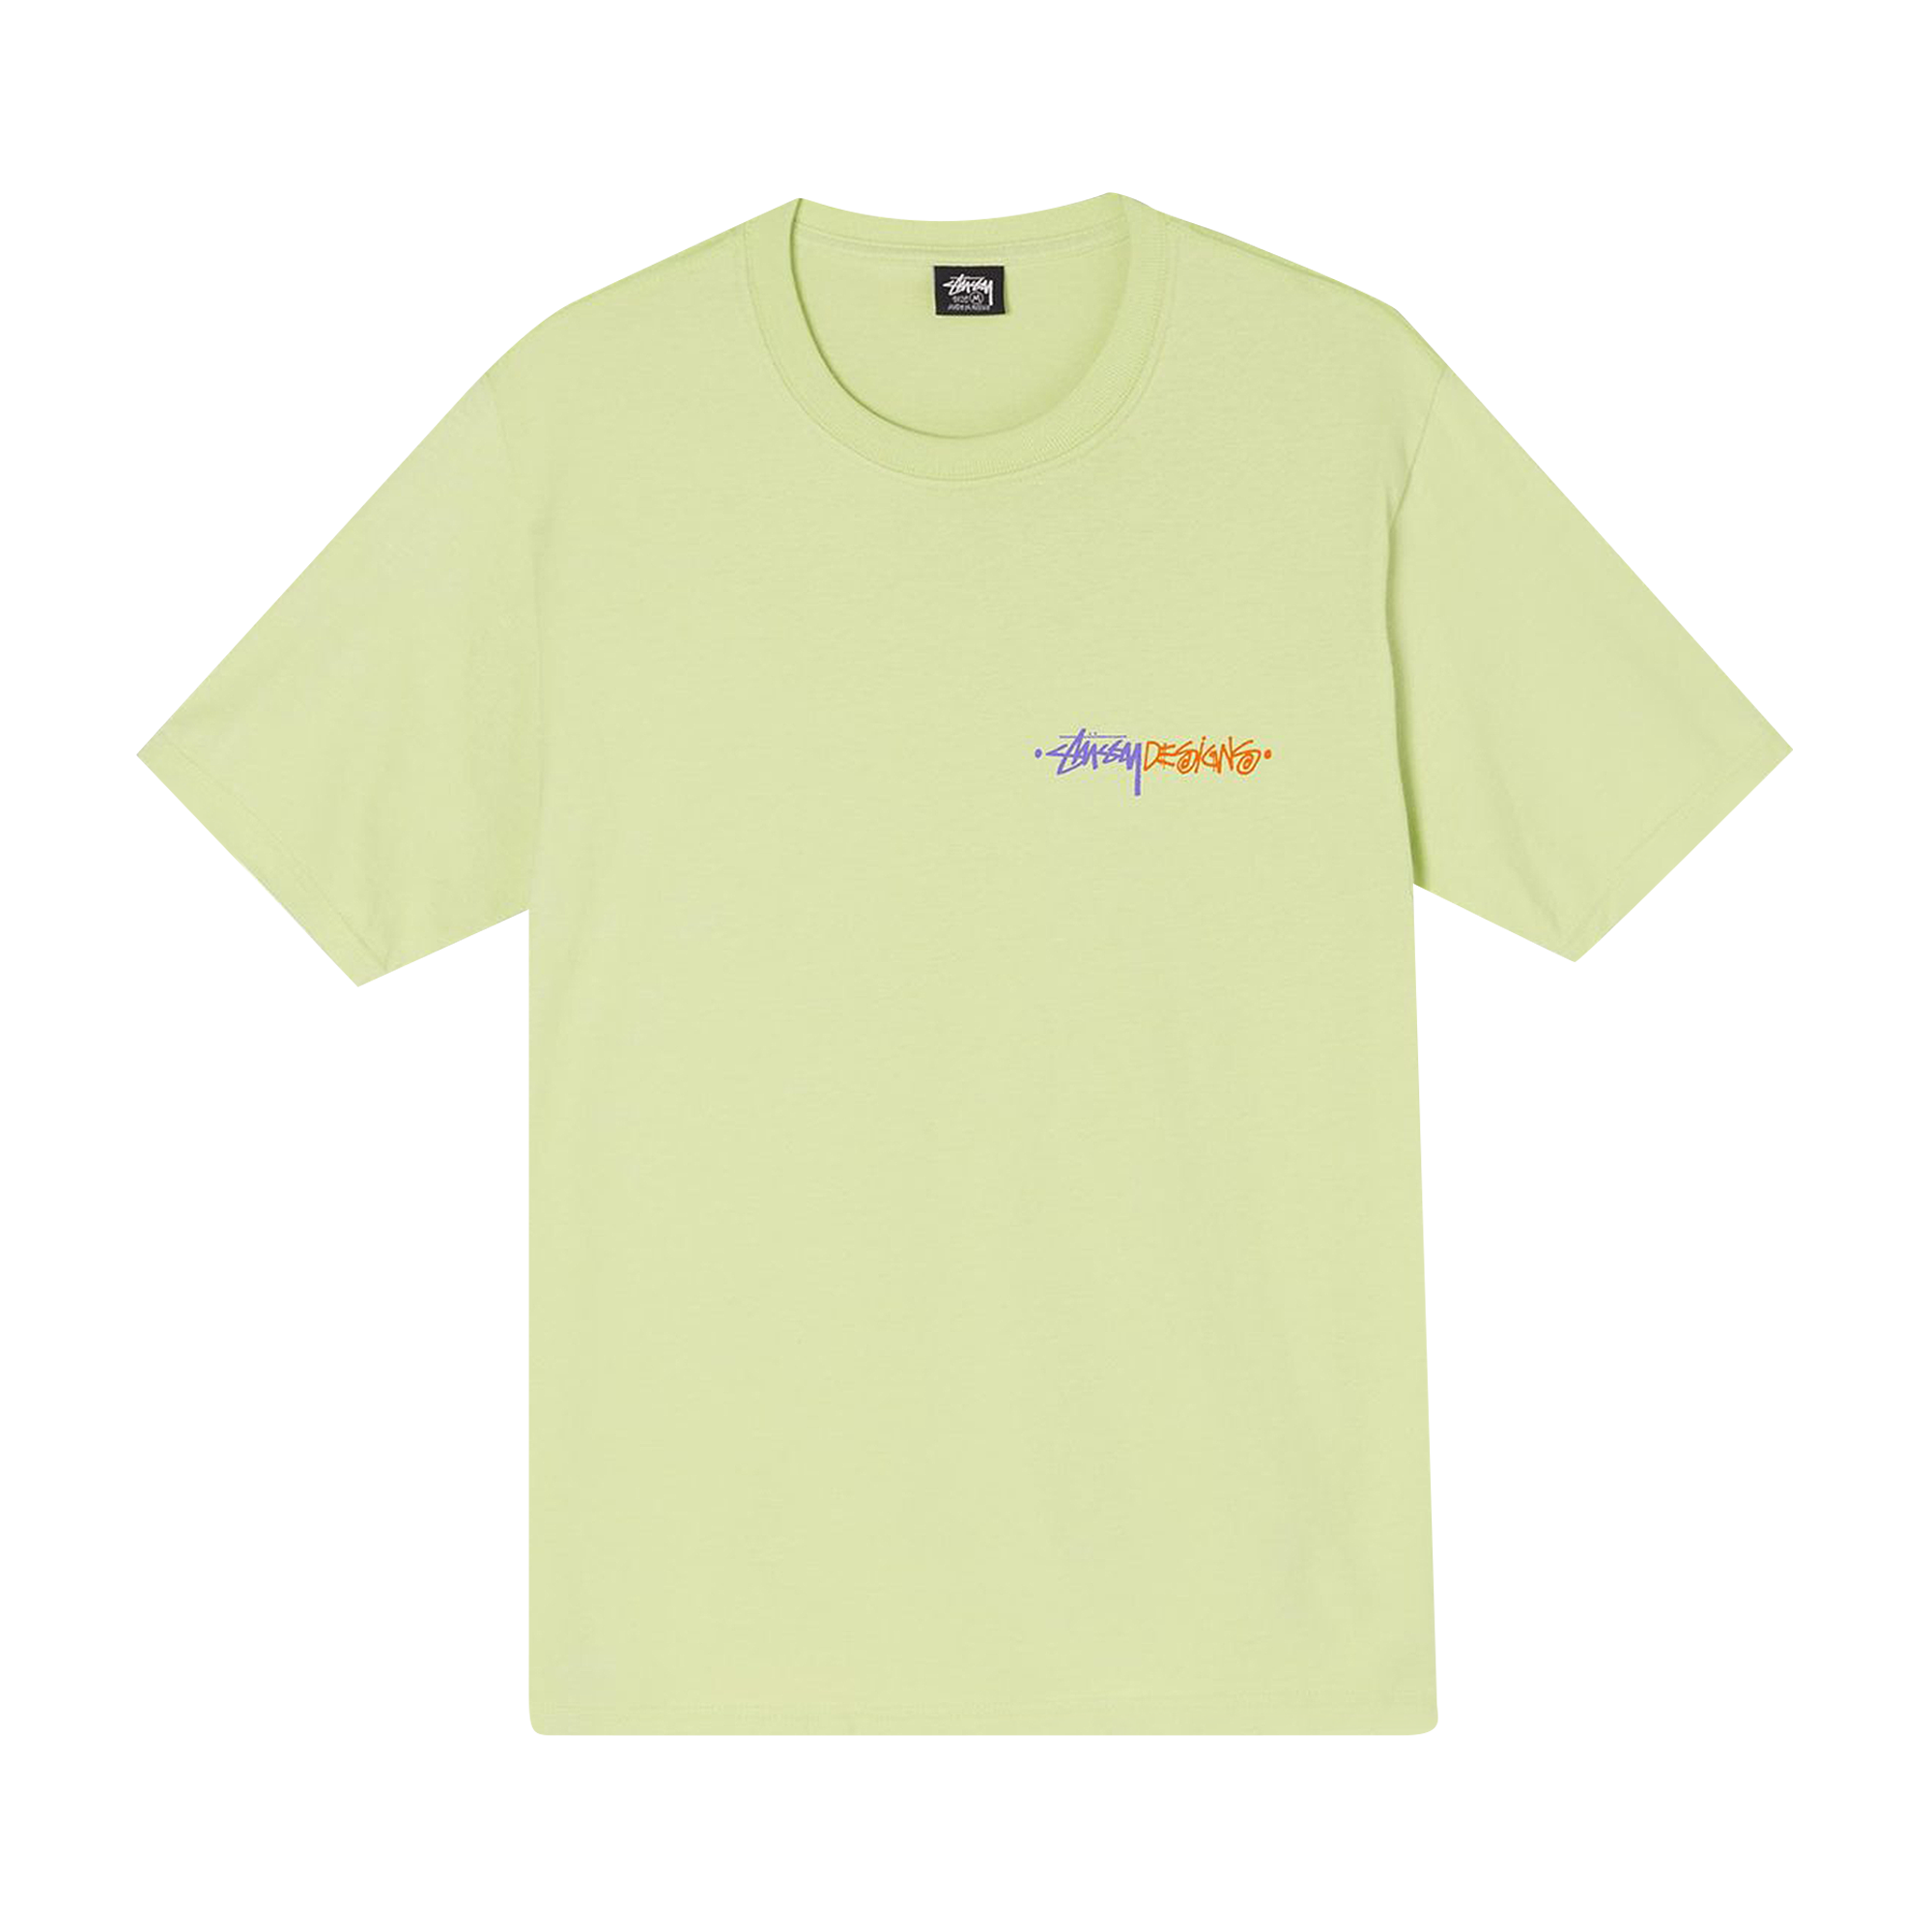 Pre-owned Stussy Positive Vibration Tee Shirt 'yellow'